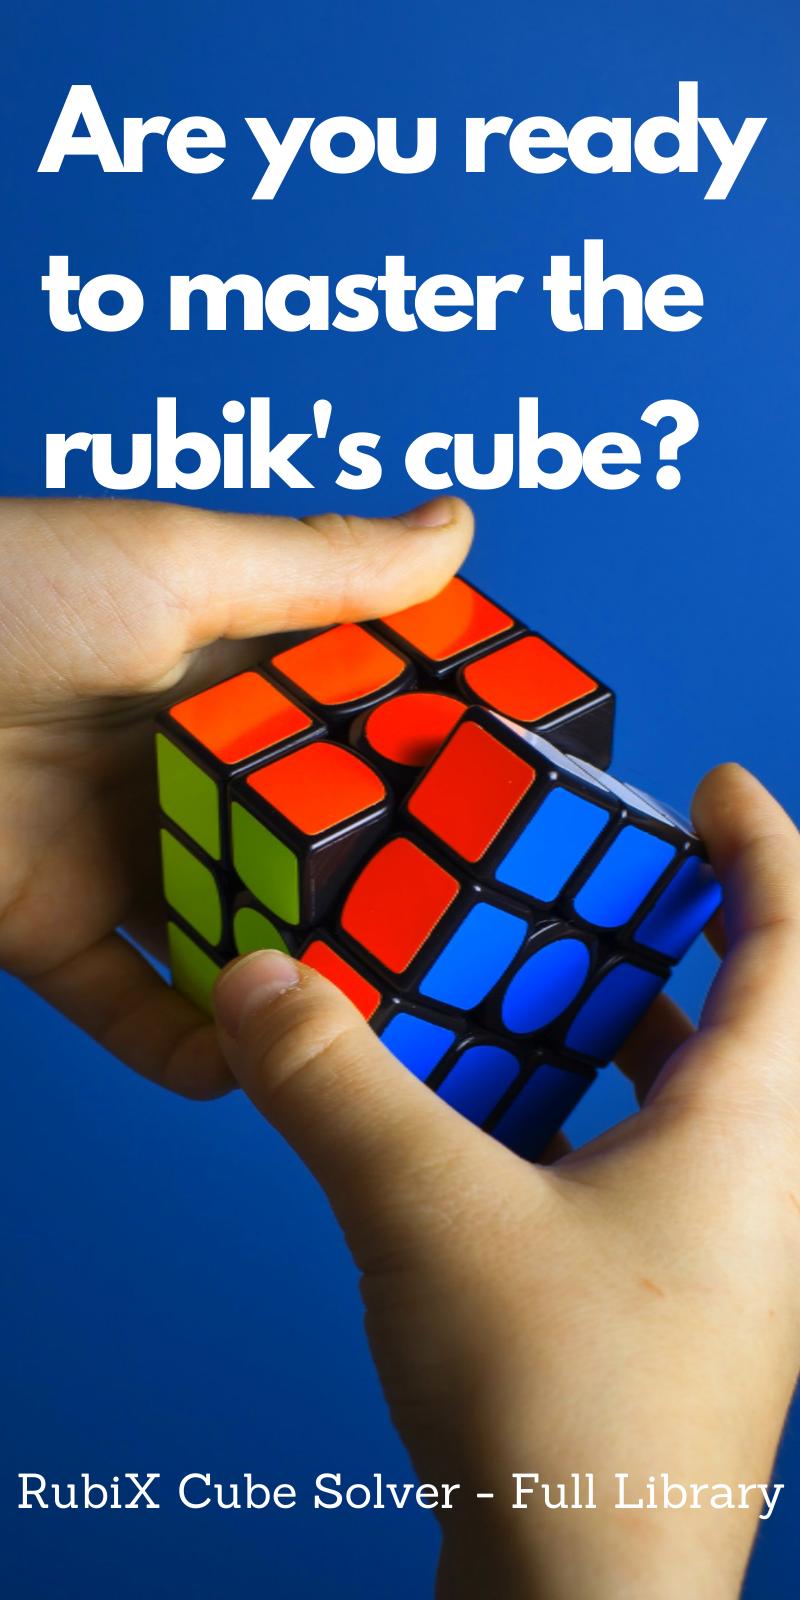 Rubix Cube Solver Library Rubik Algorithms 3x3 For Android Apk Download